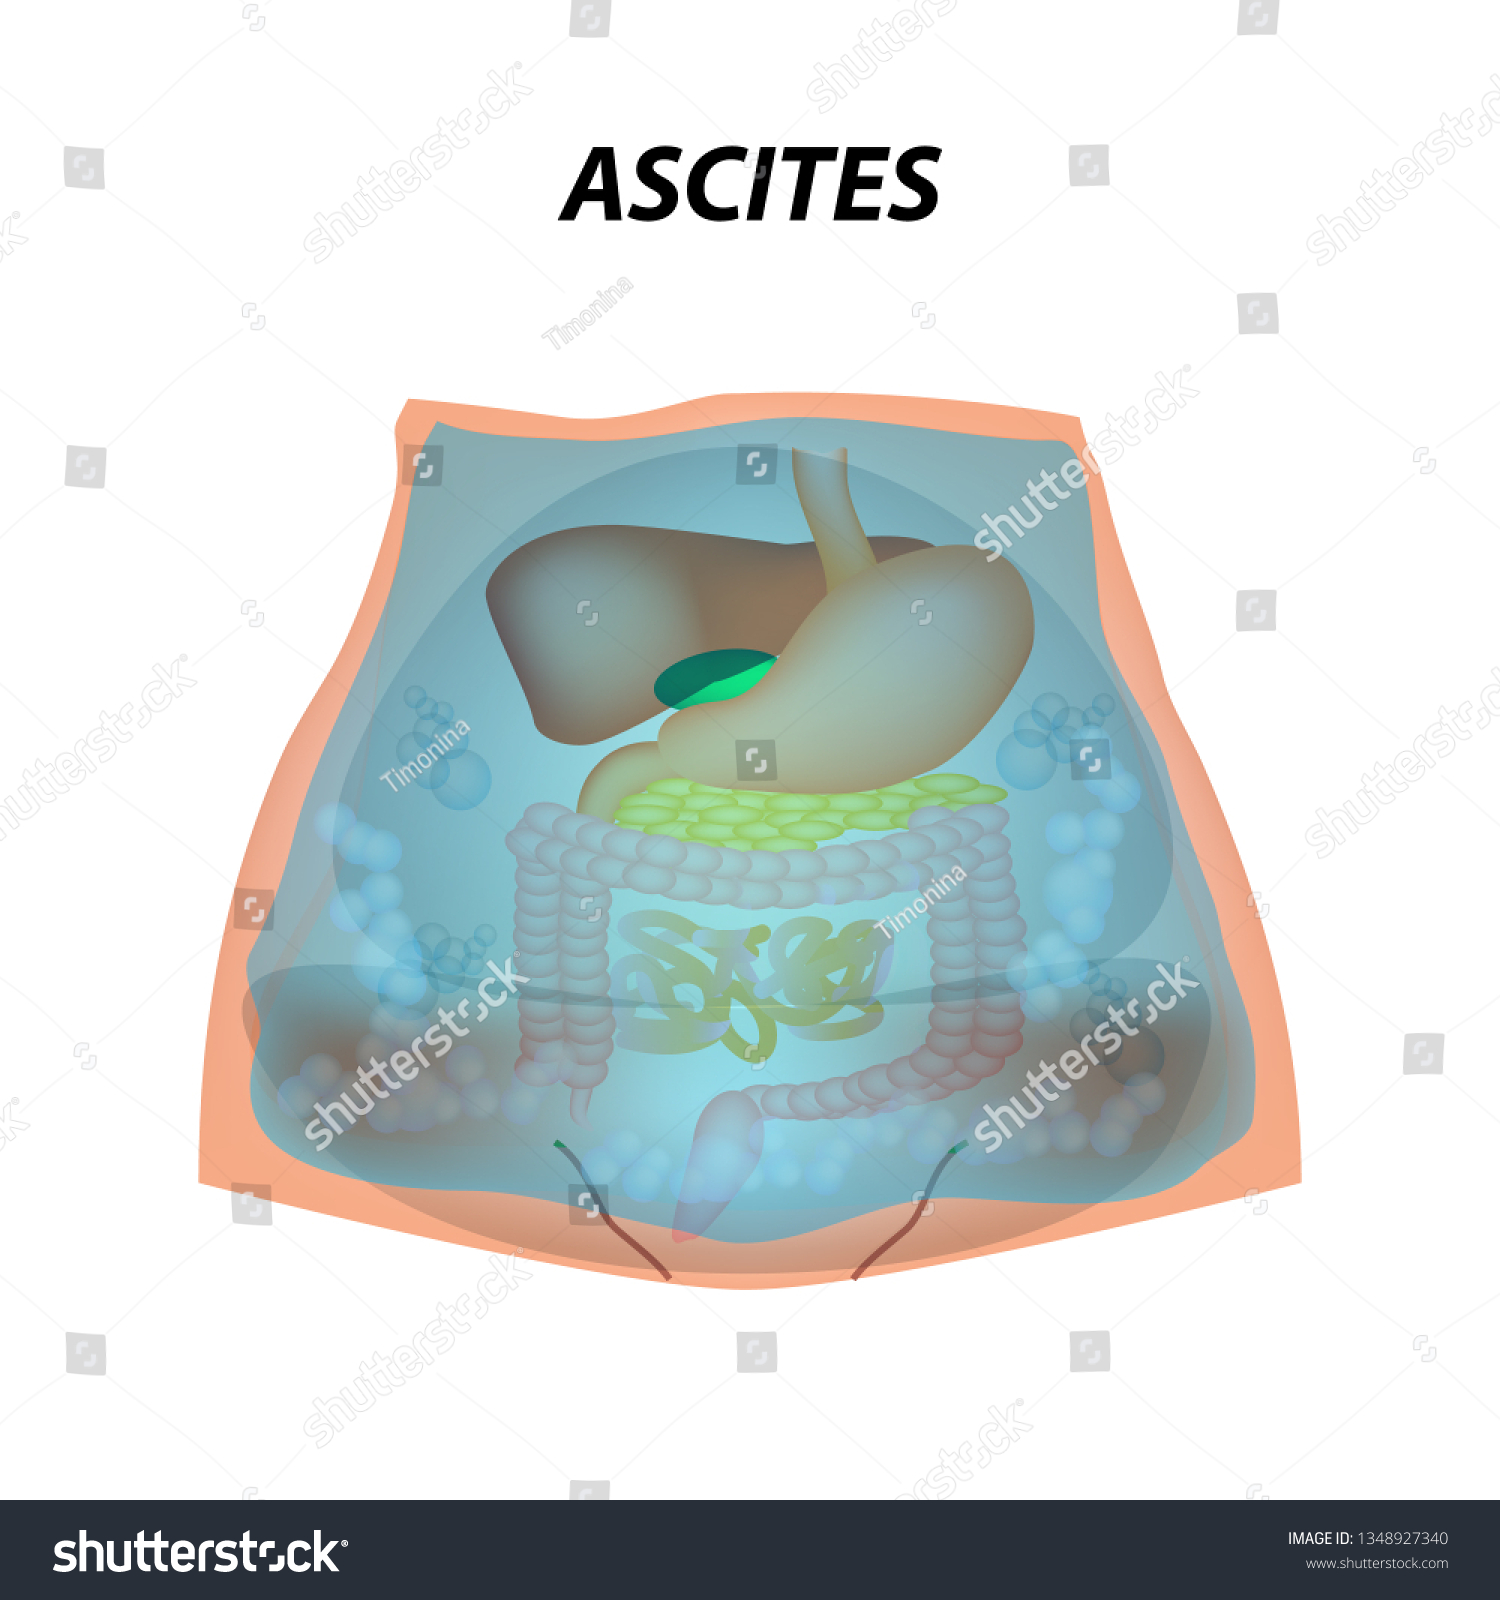 Ascites Free Fluid In The Abdominal Cavity Royalty Free Stock Vector